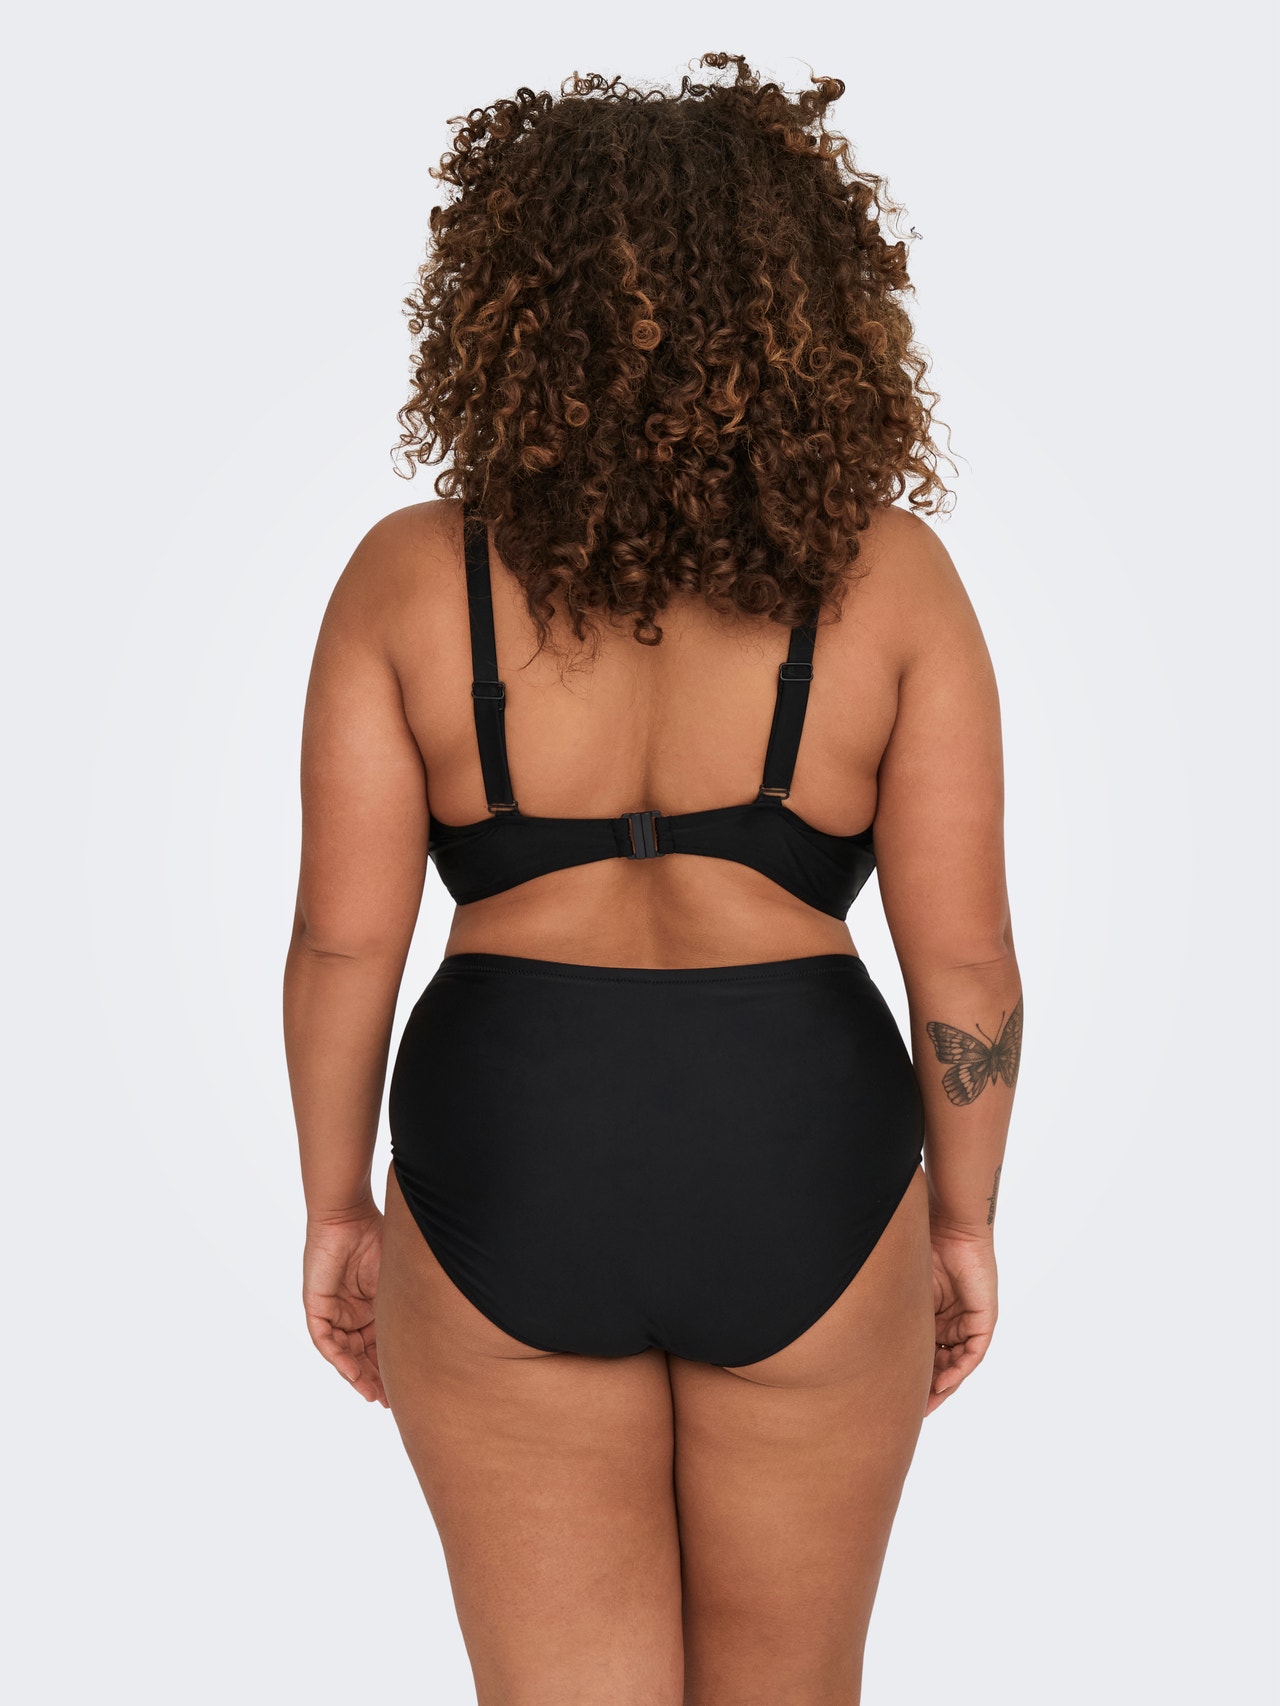 ONLY Curvy - À taille haute Slips -Black - 15269554